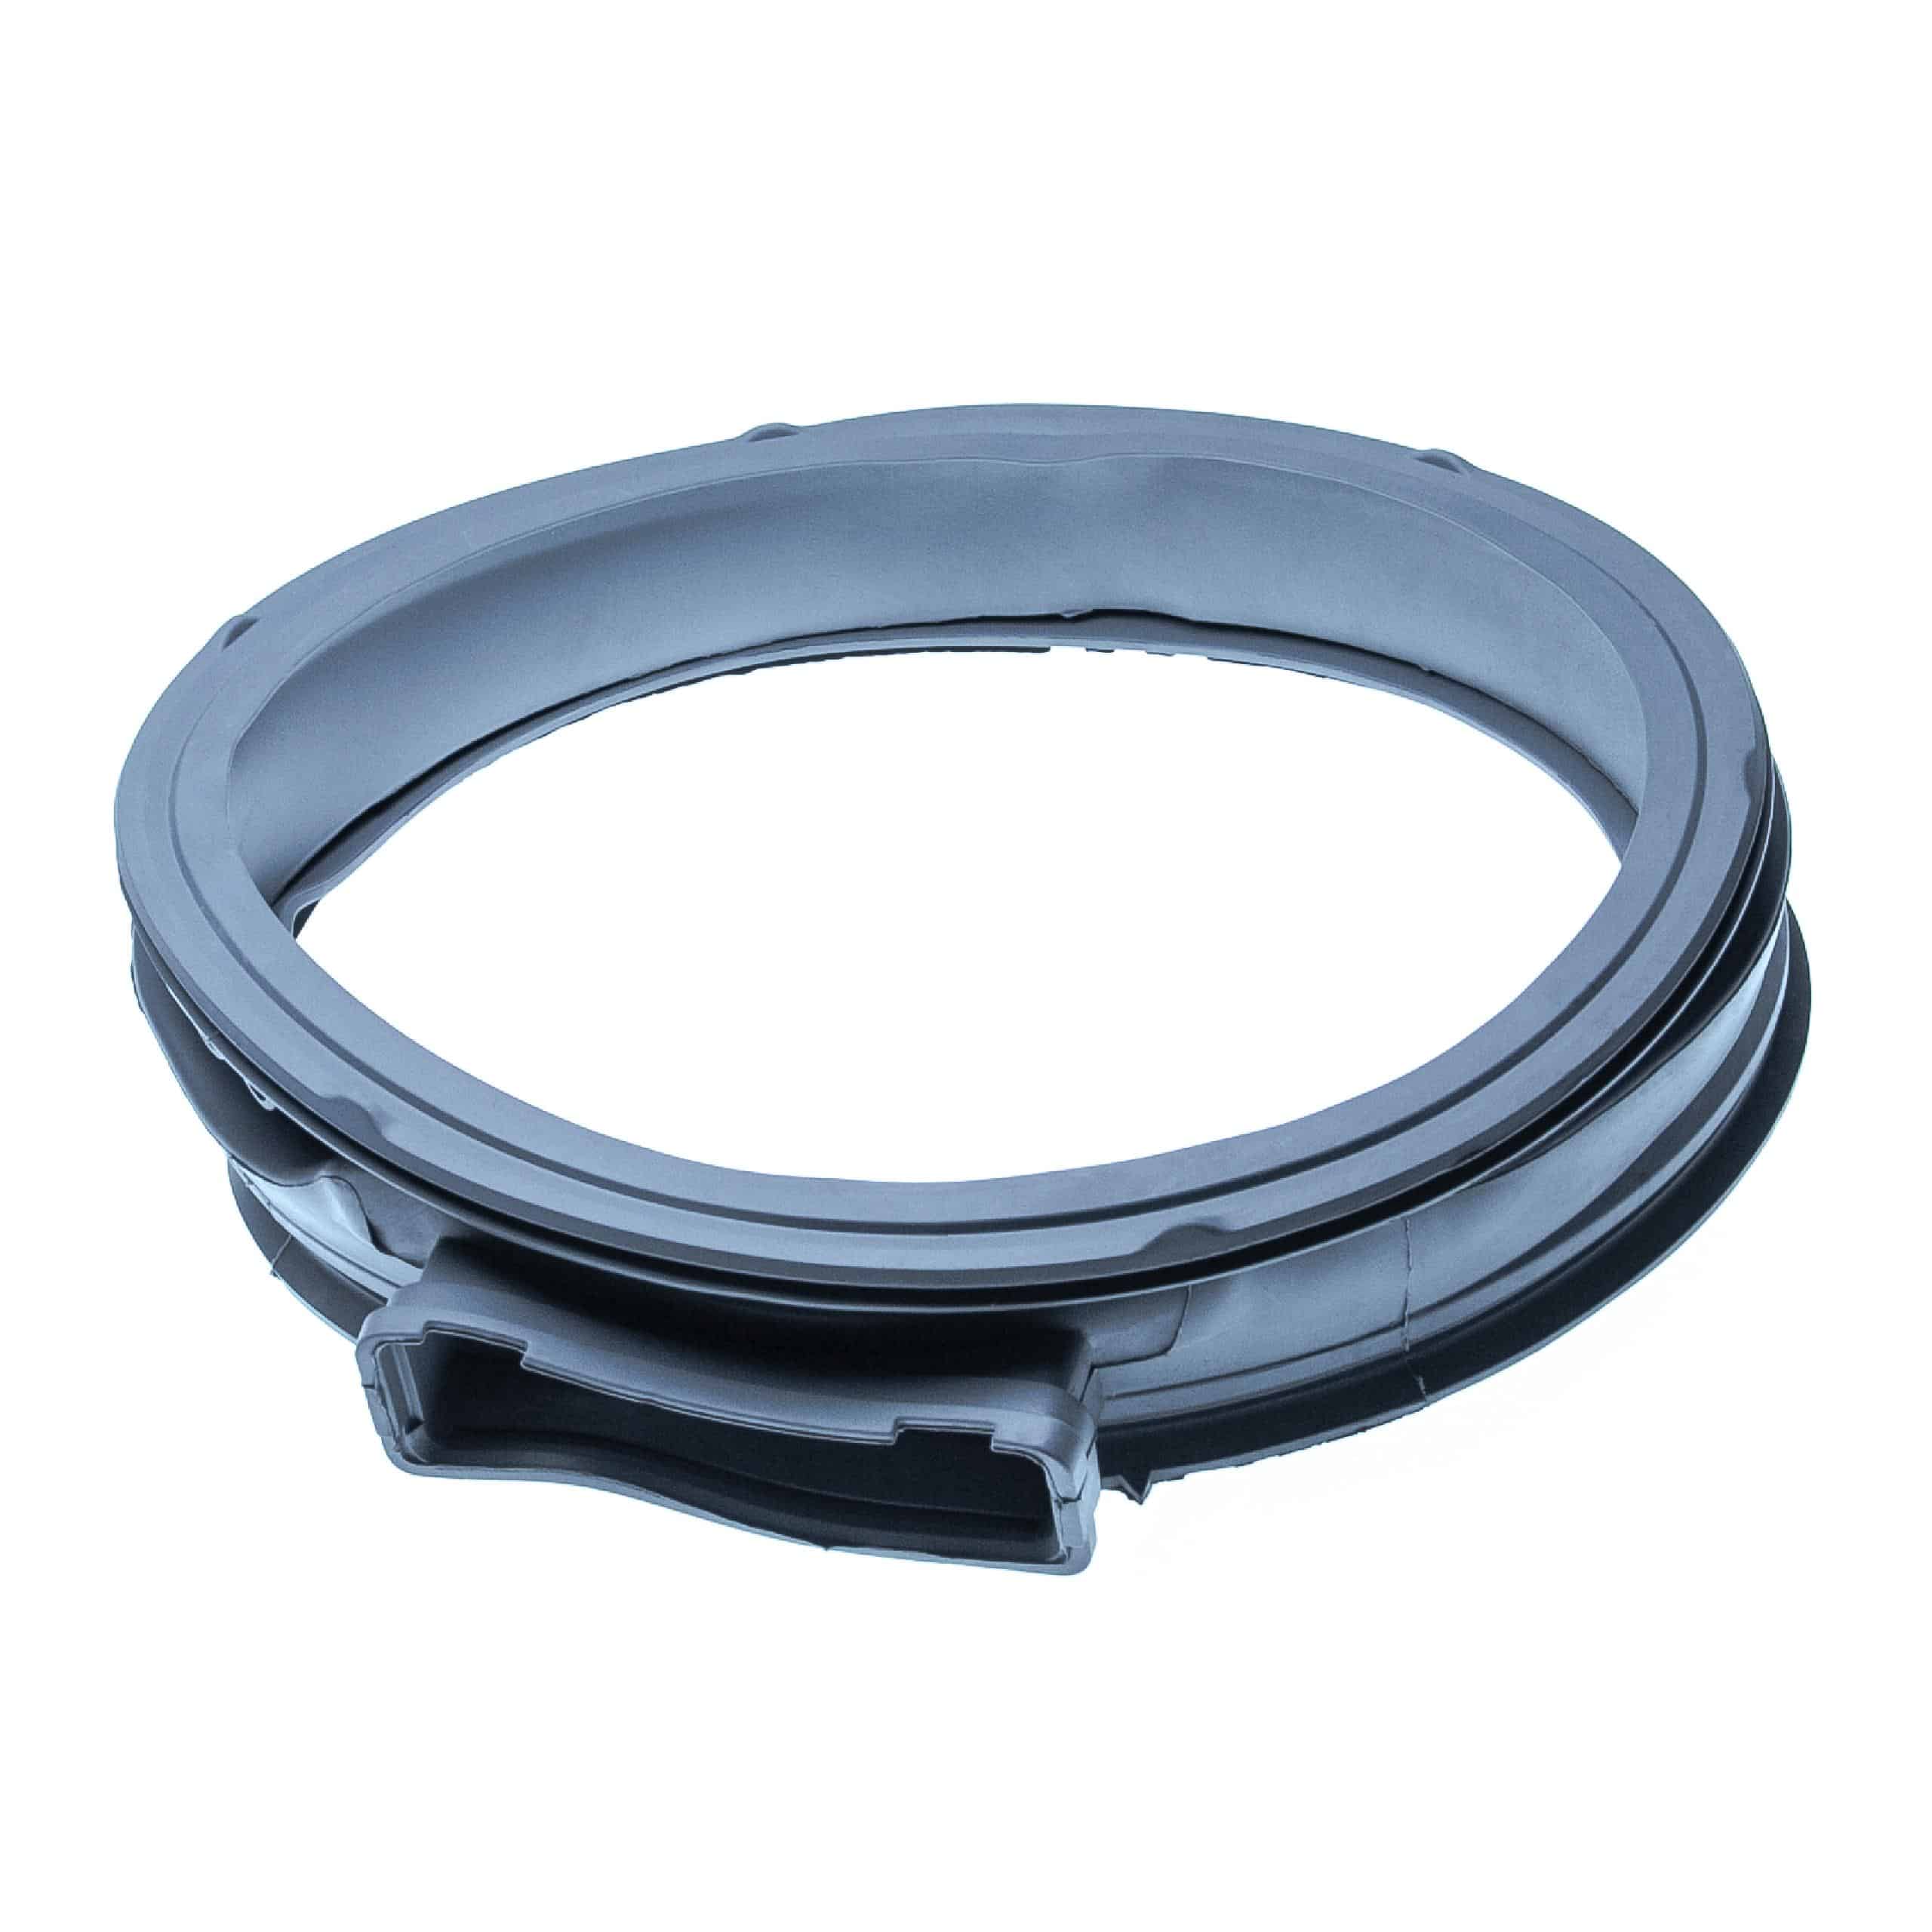 Door Seal replaces LG MDS65696501 for LG Washing Machine